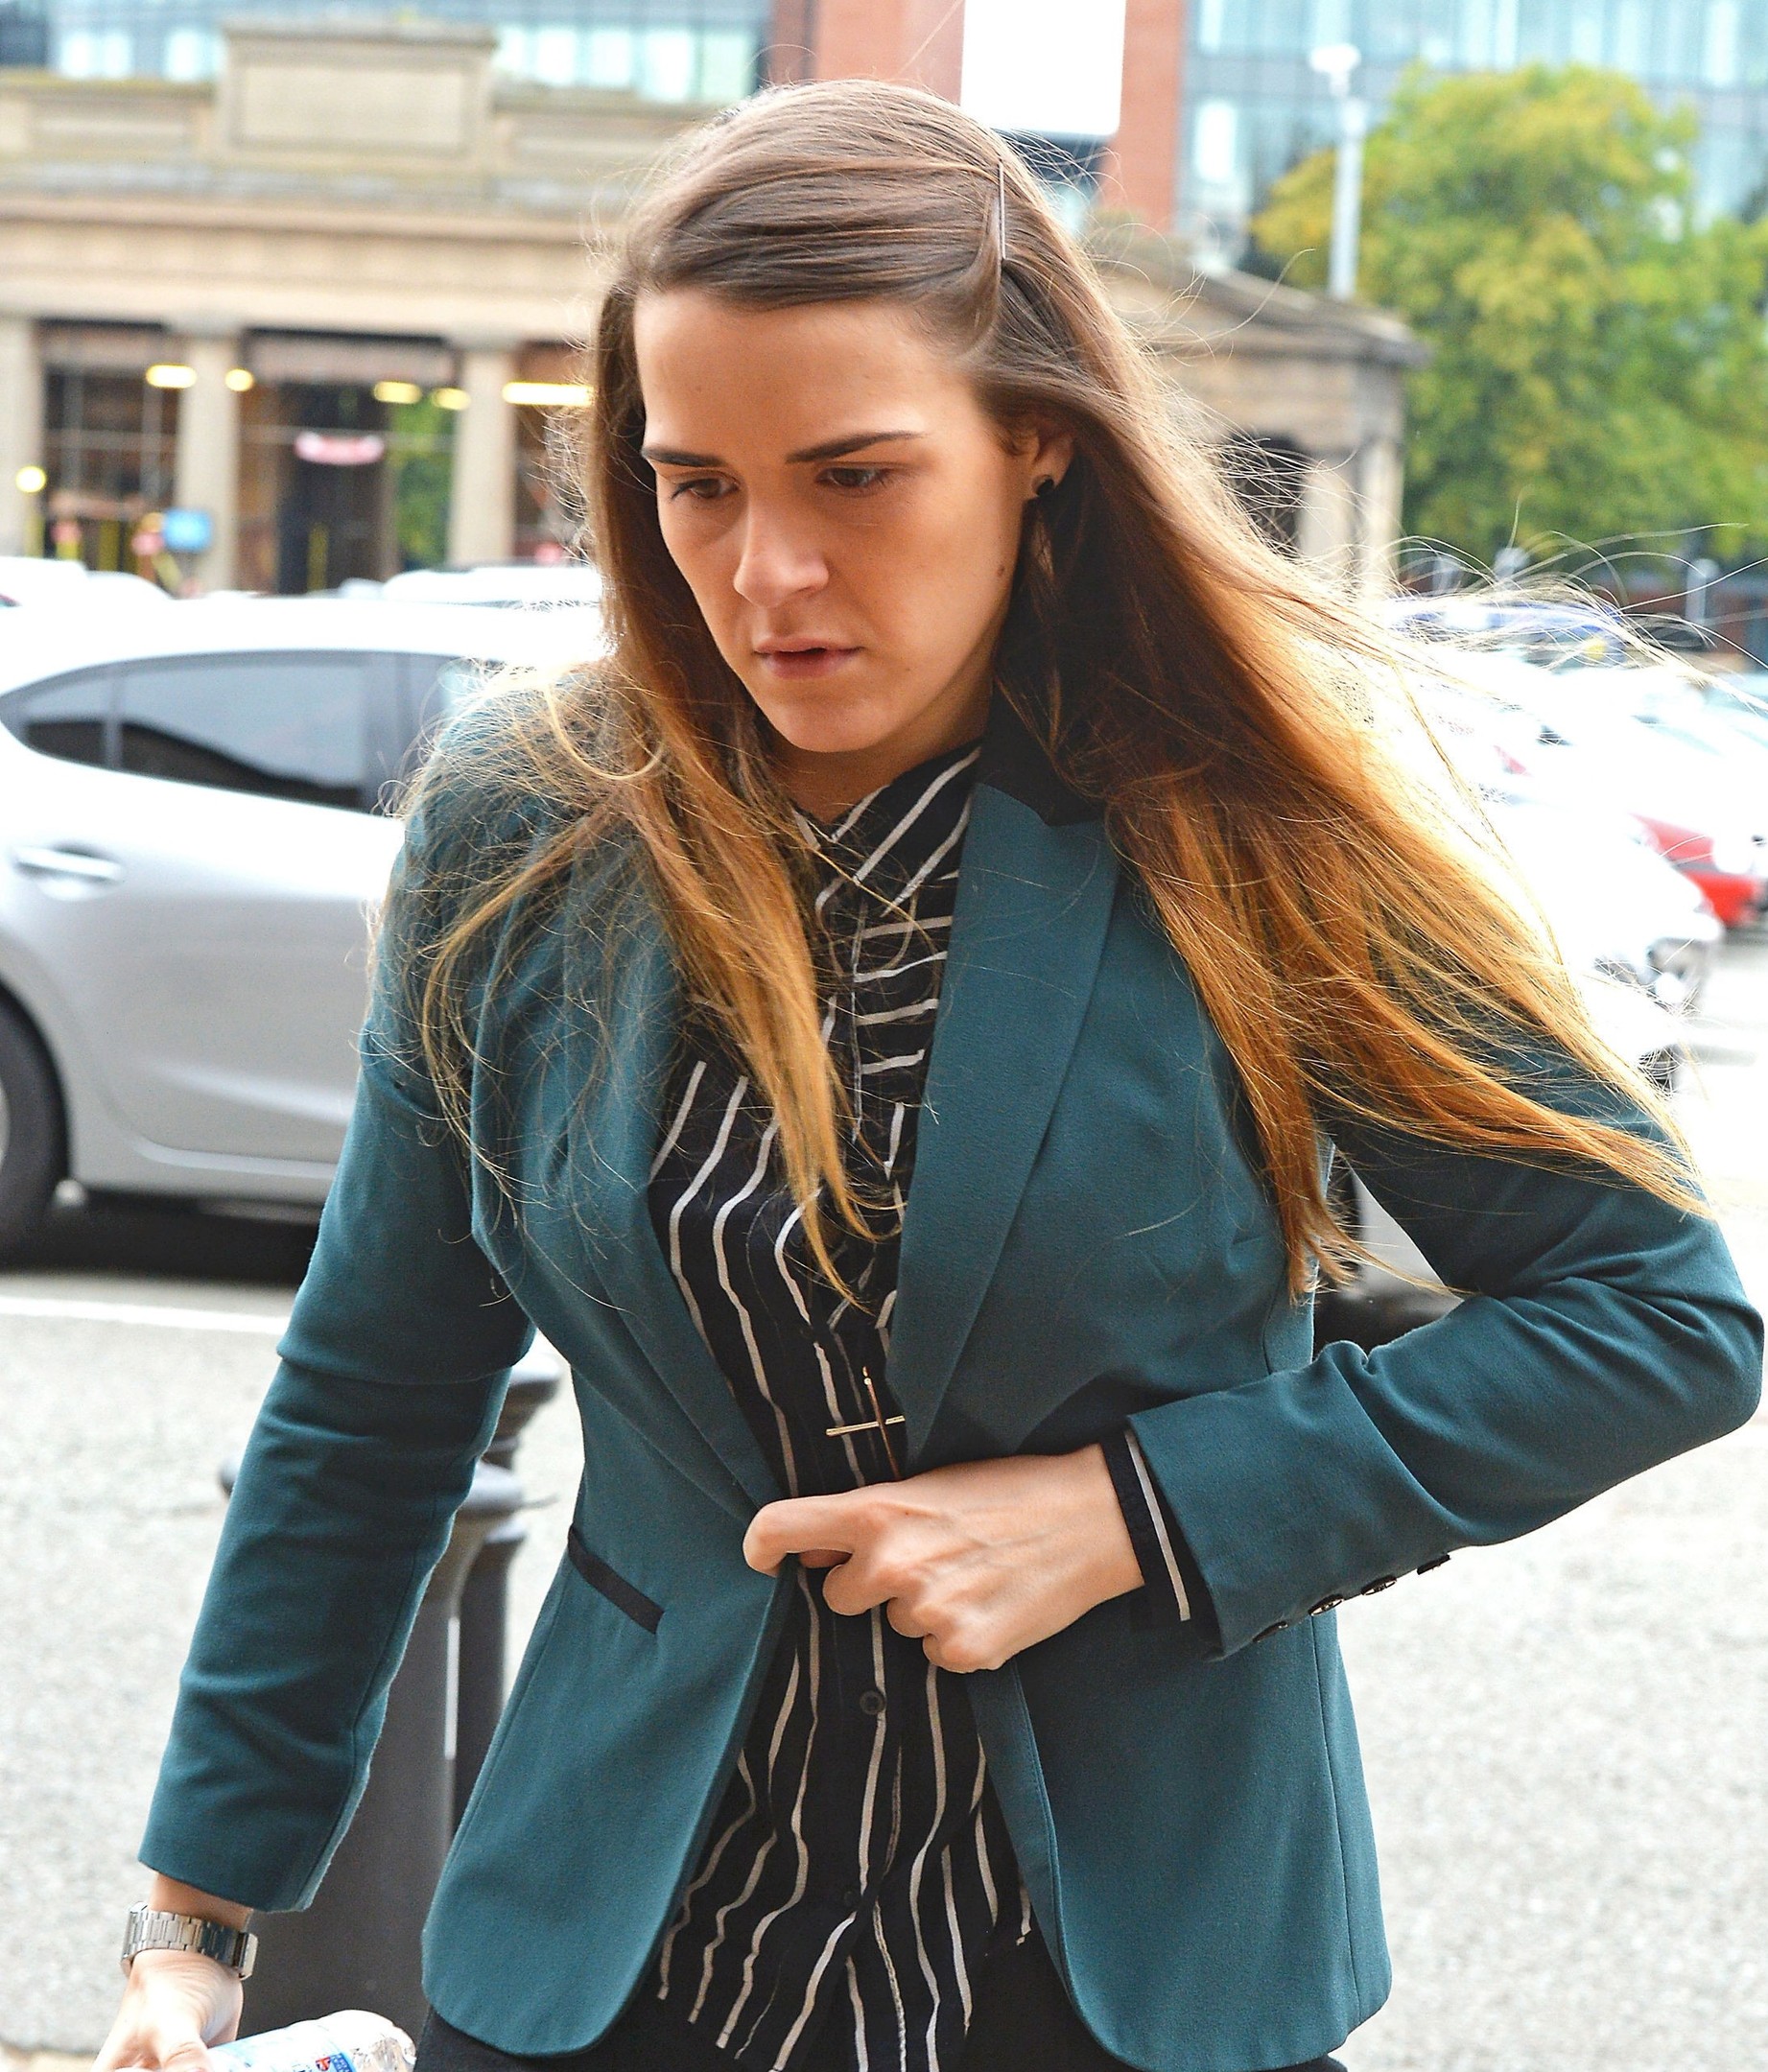 Gayle Newland convicted at Chester Crown Court of three counts of sexual assault after impersonating a man to dupe her friend into having sex.